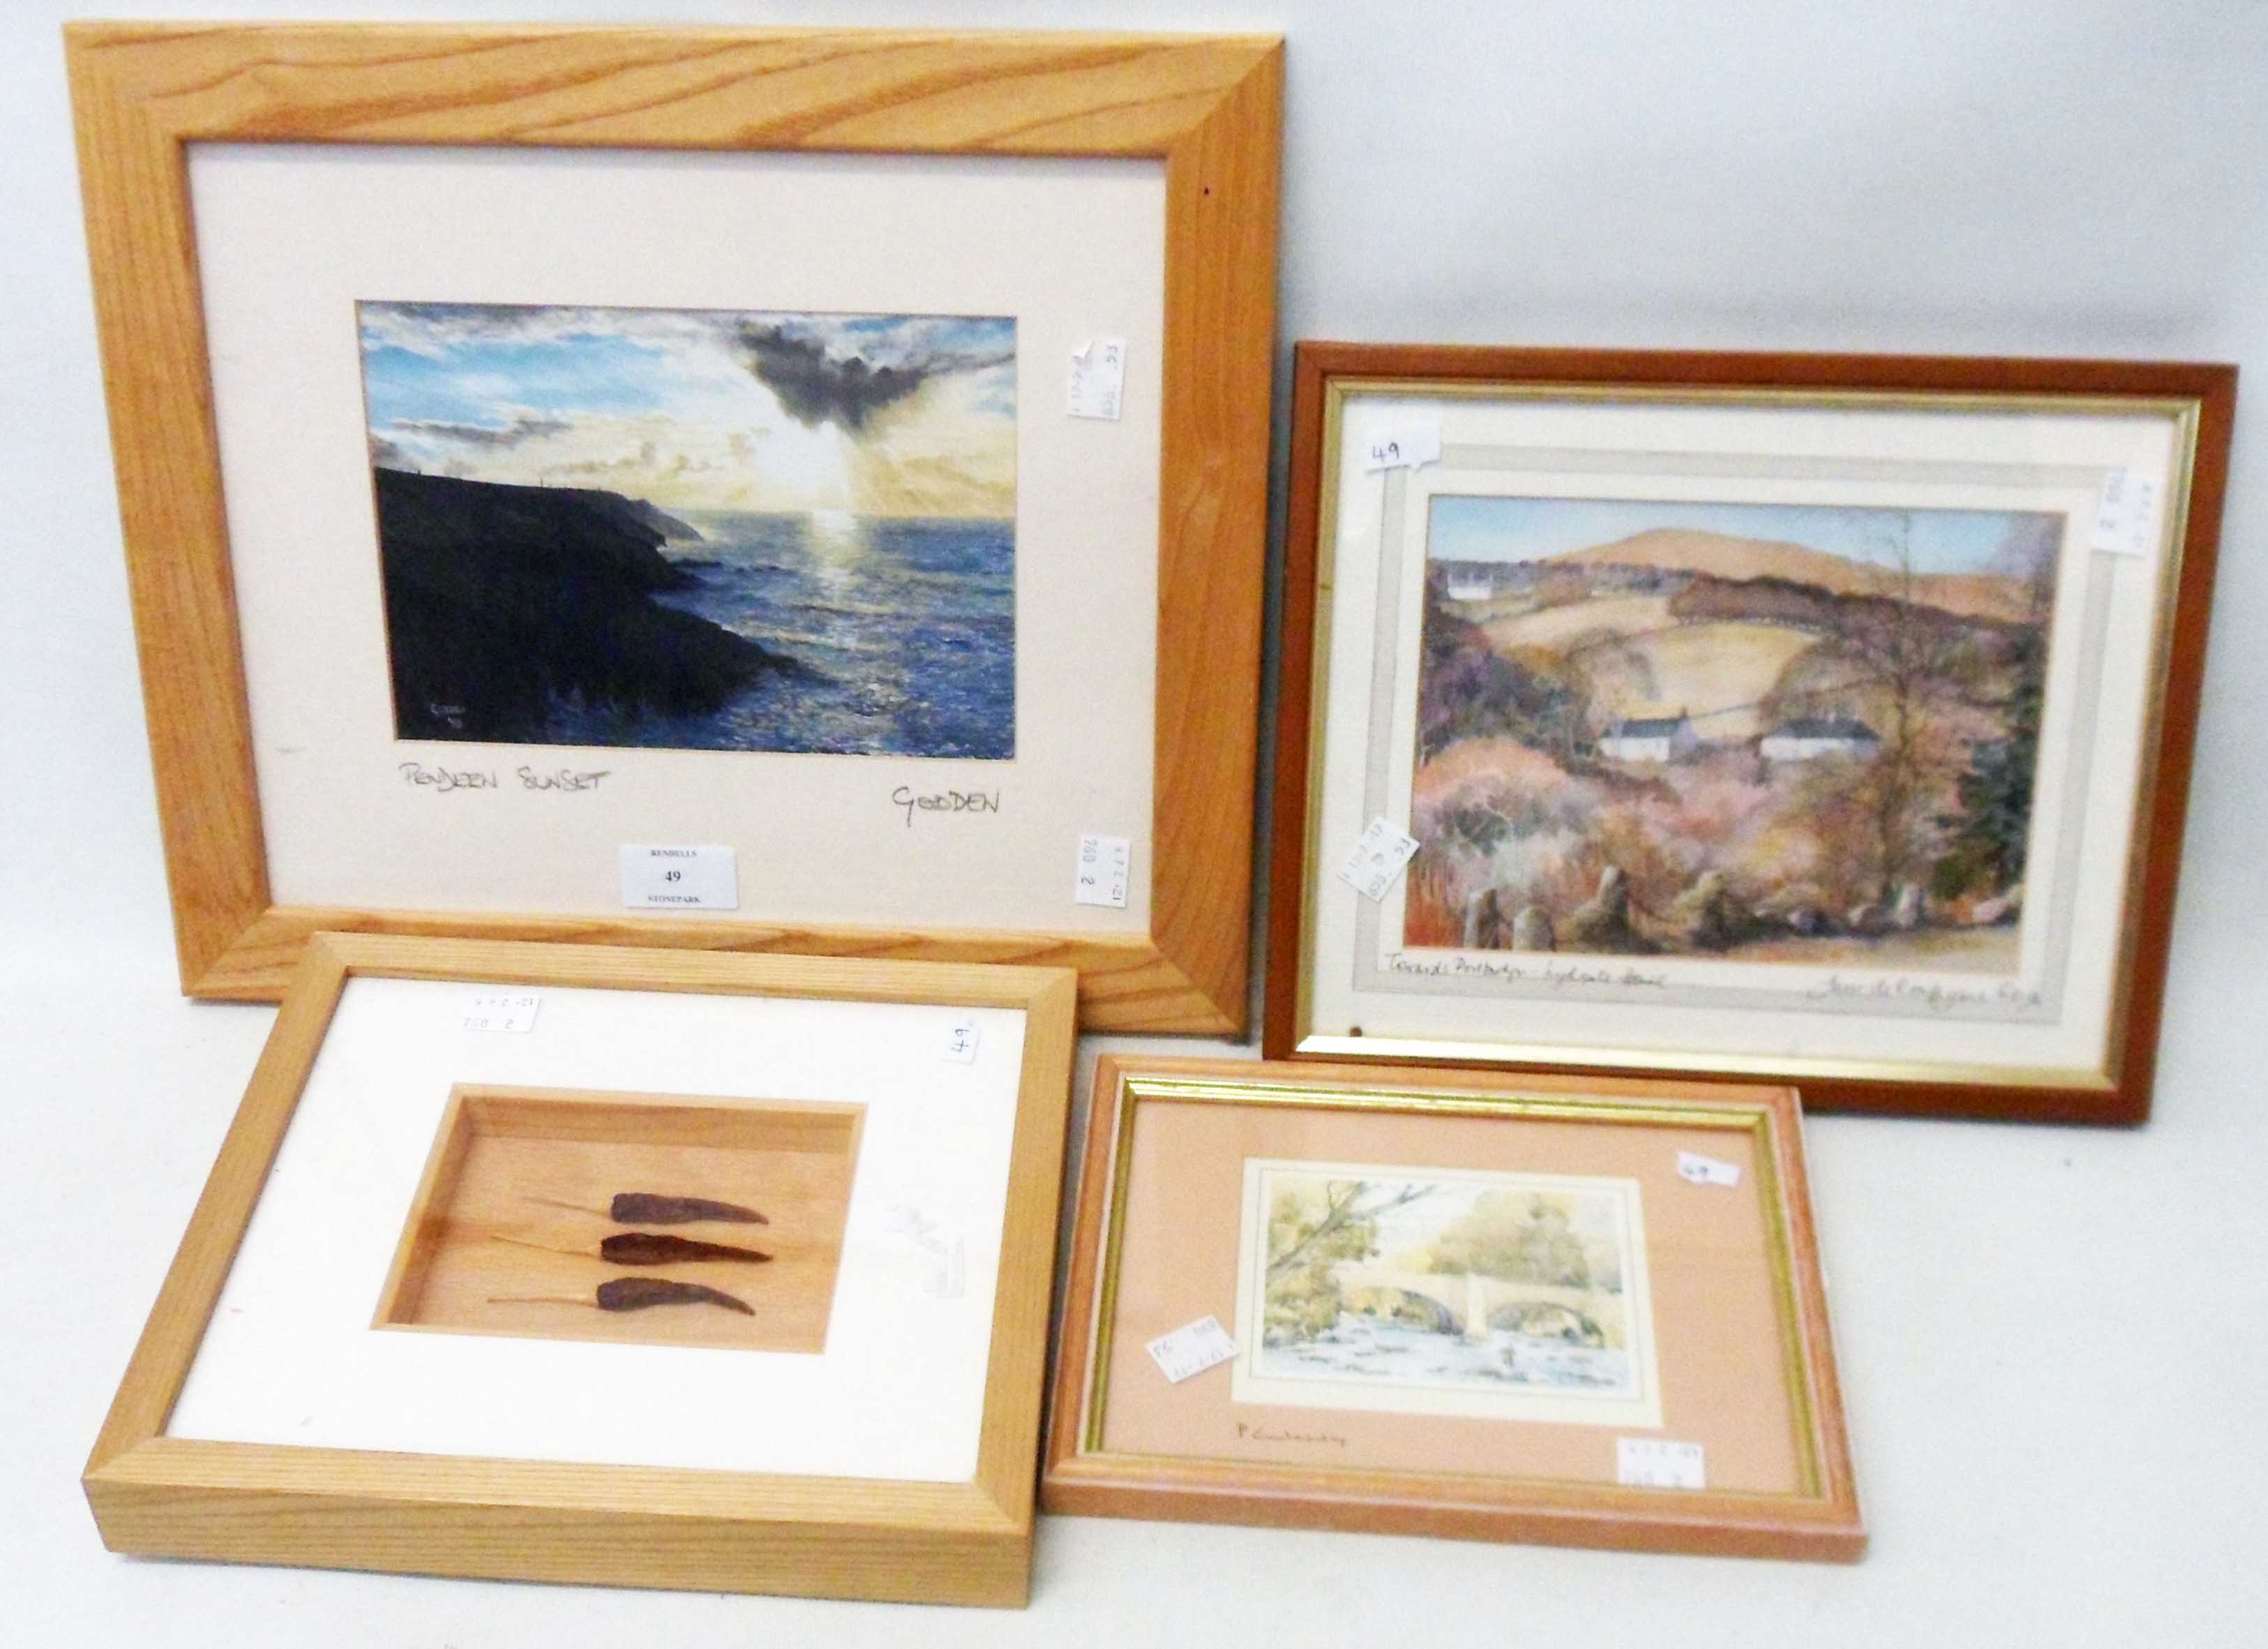 Three framed modern local view prints - signed - sold with a boxed framed display of chillies